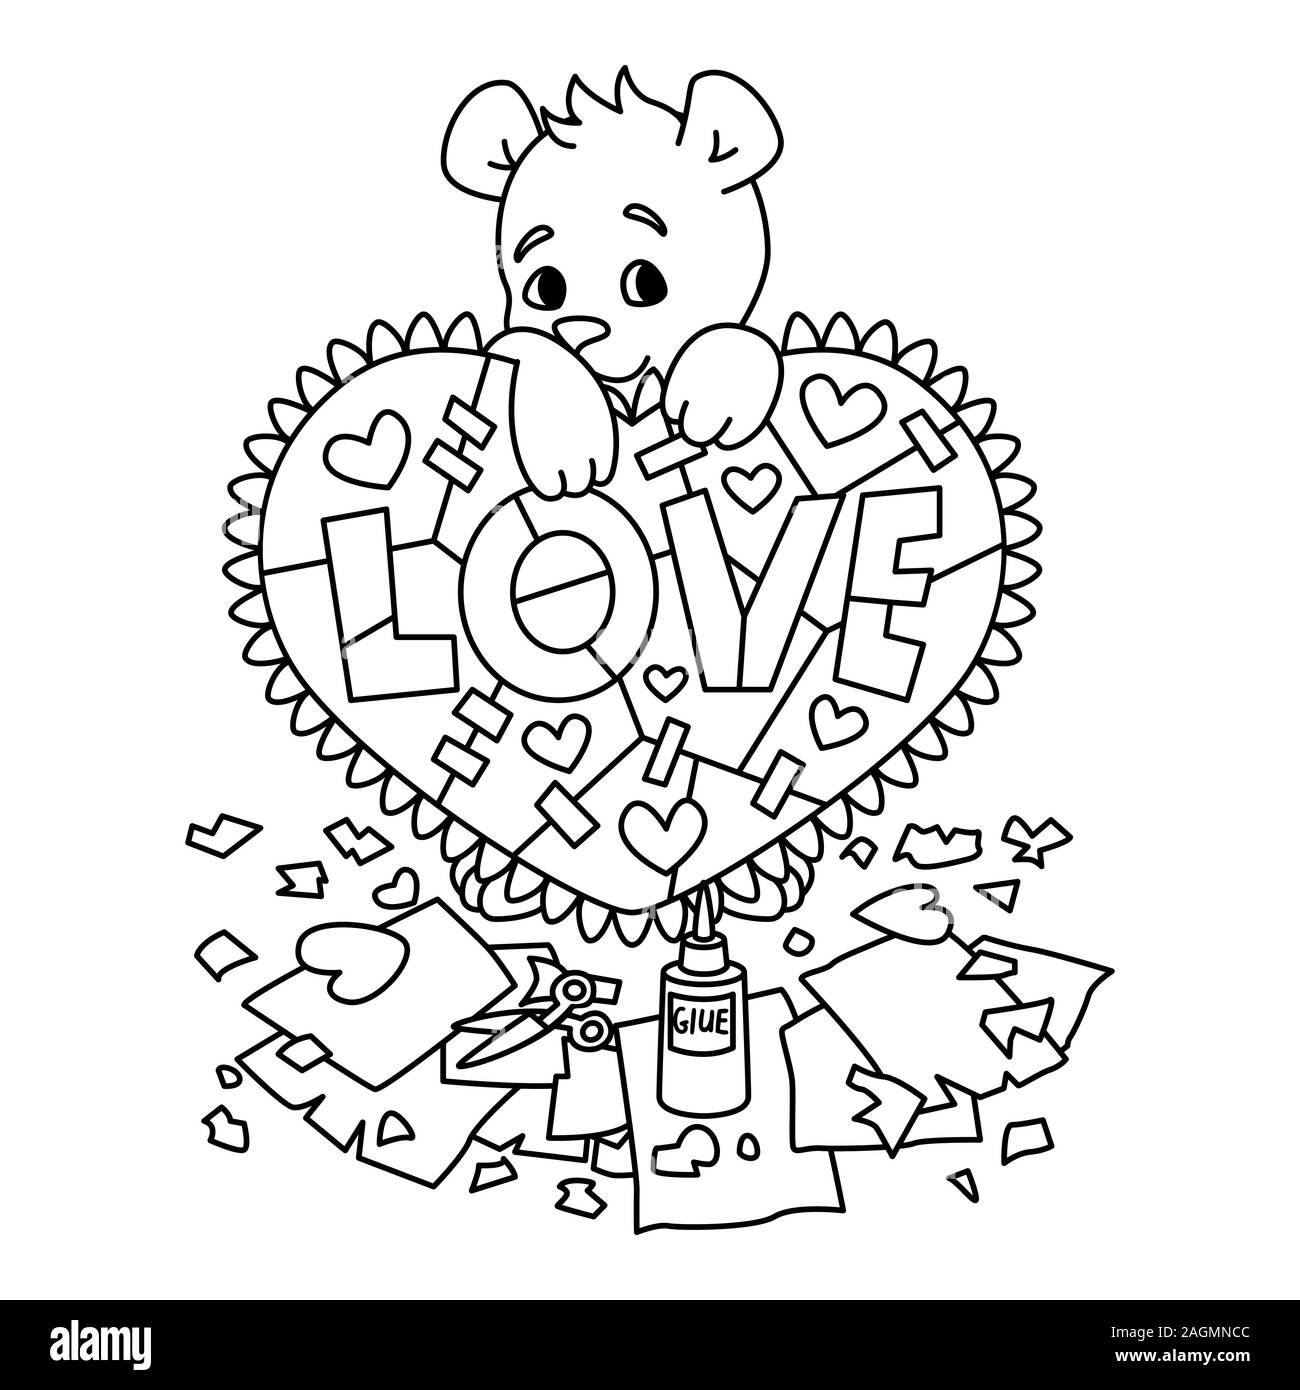 Valentines day greeting card with teddy bear with scrapbook heart february greeting card with hearts vector illustration isolated on white backgr stock vector image art